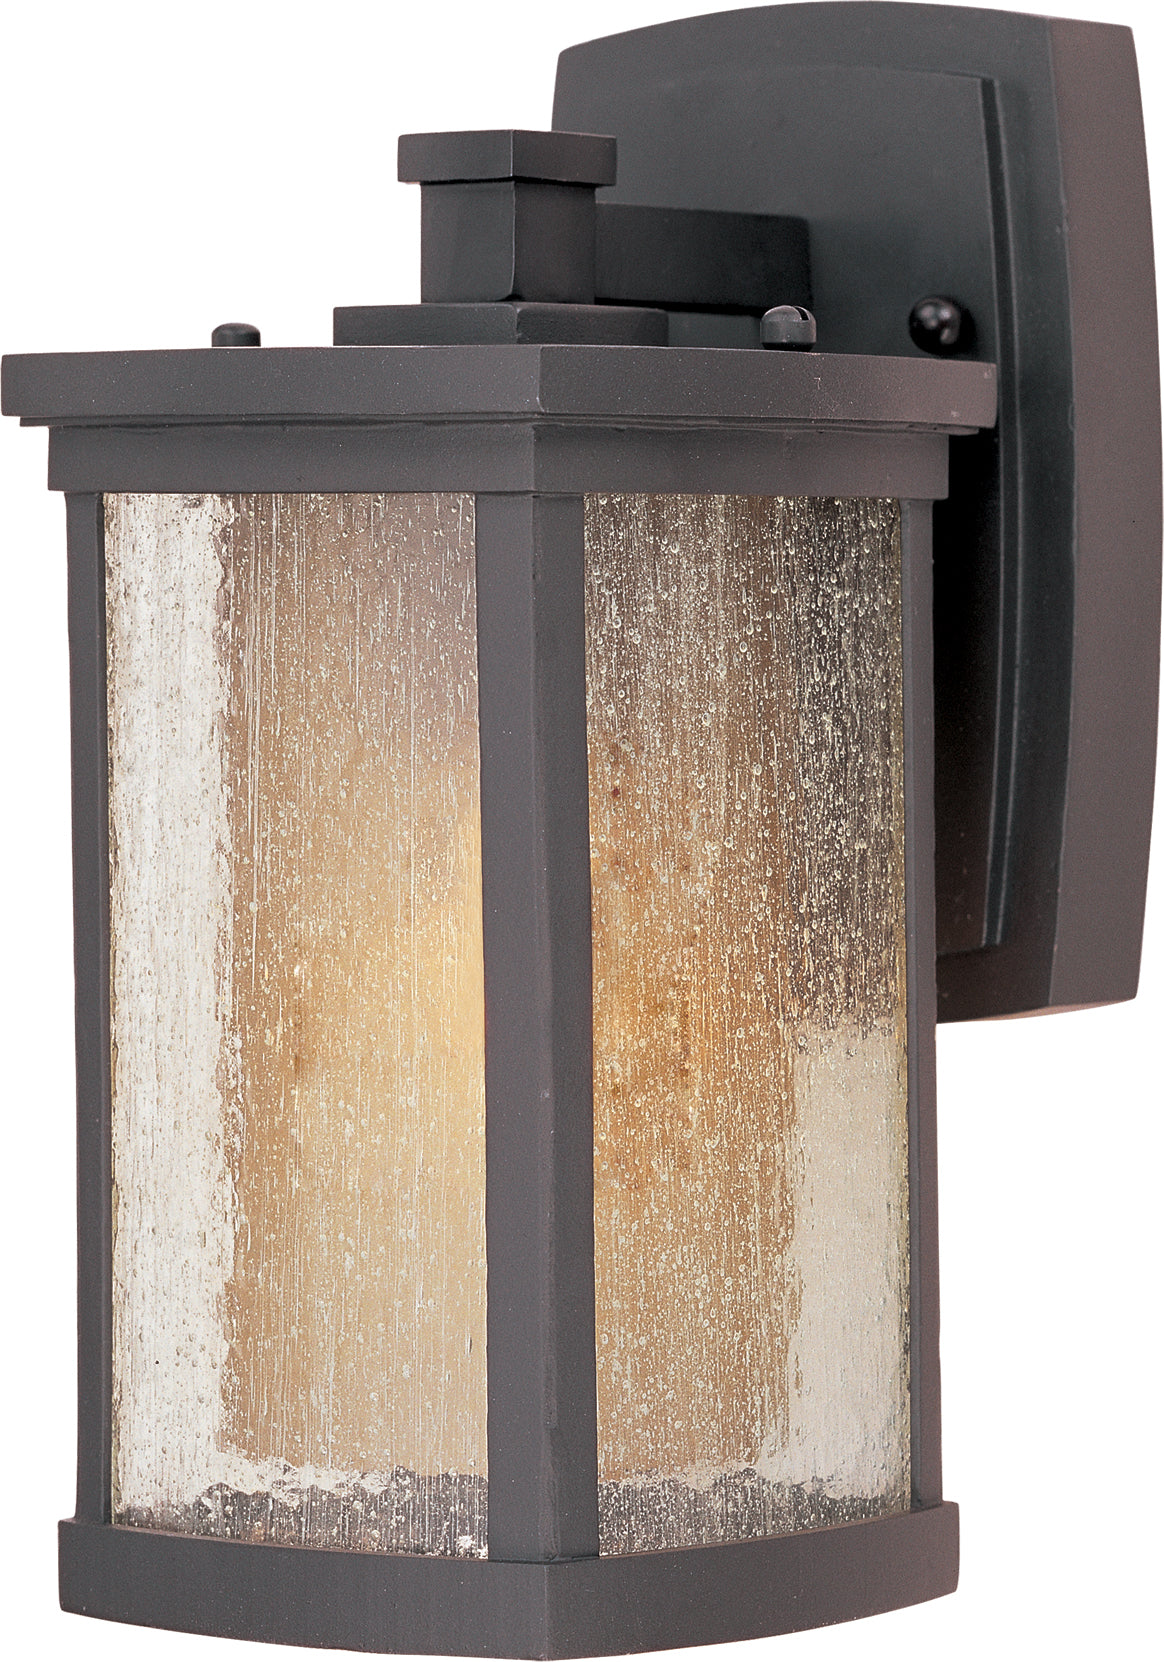 Maxim Bungalow LED E26-Outdoor Wall Mount Outdoor l Wall Maxim   